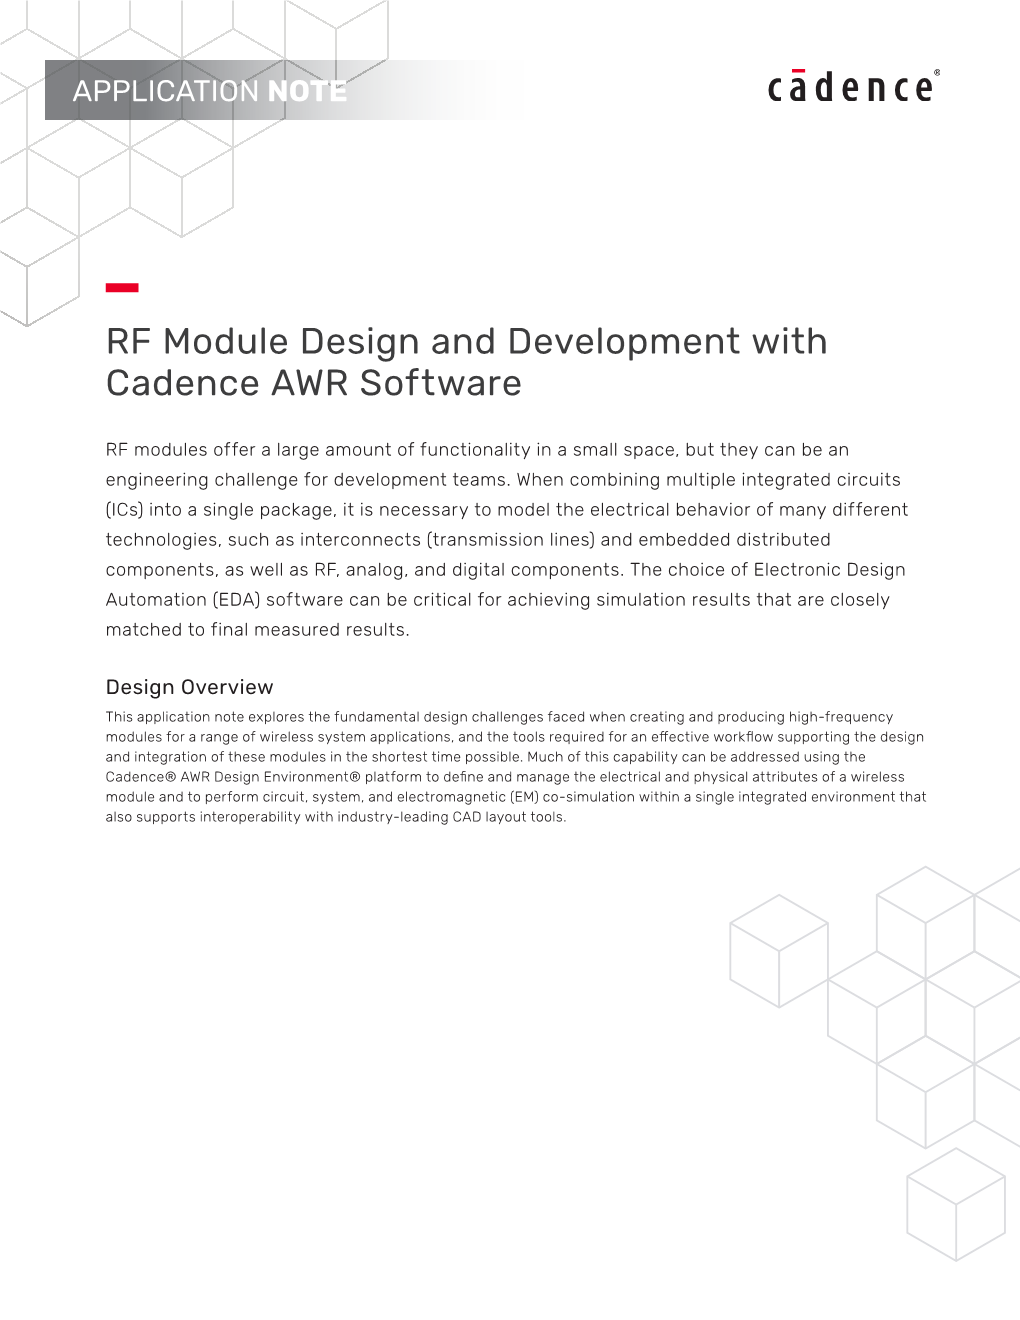 RF Module Design and Development with Cadence AWR Software